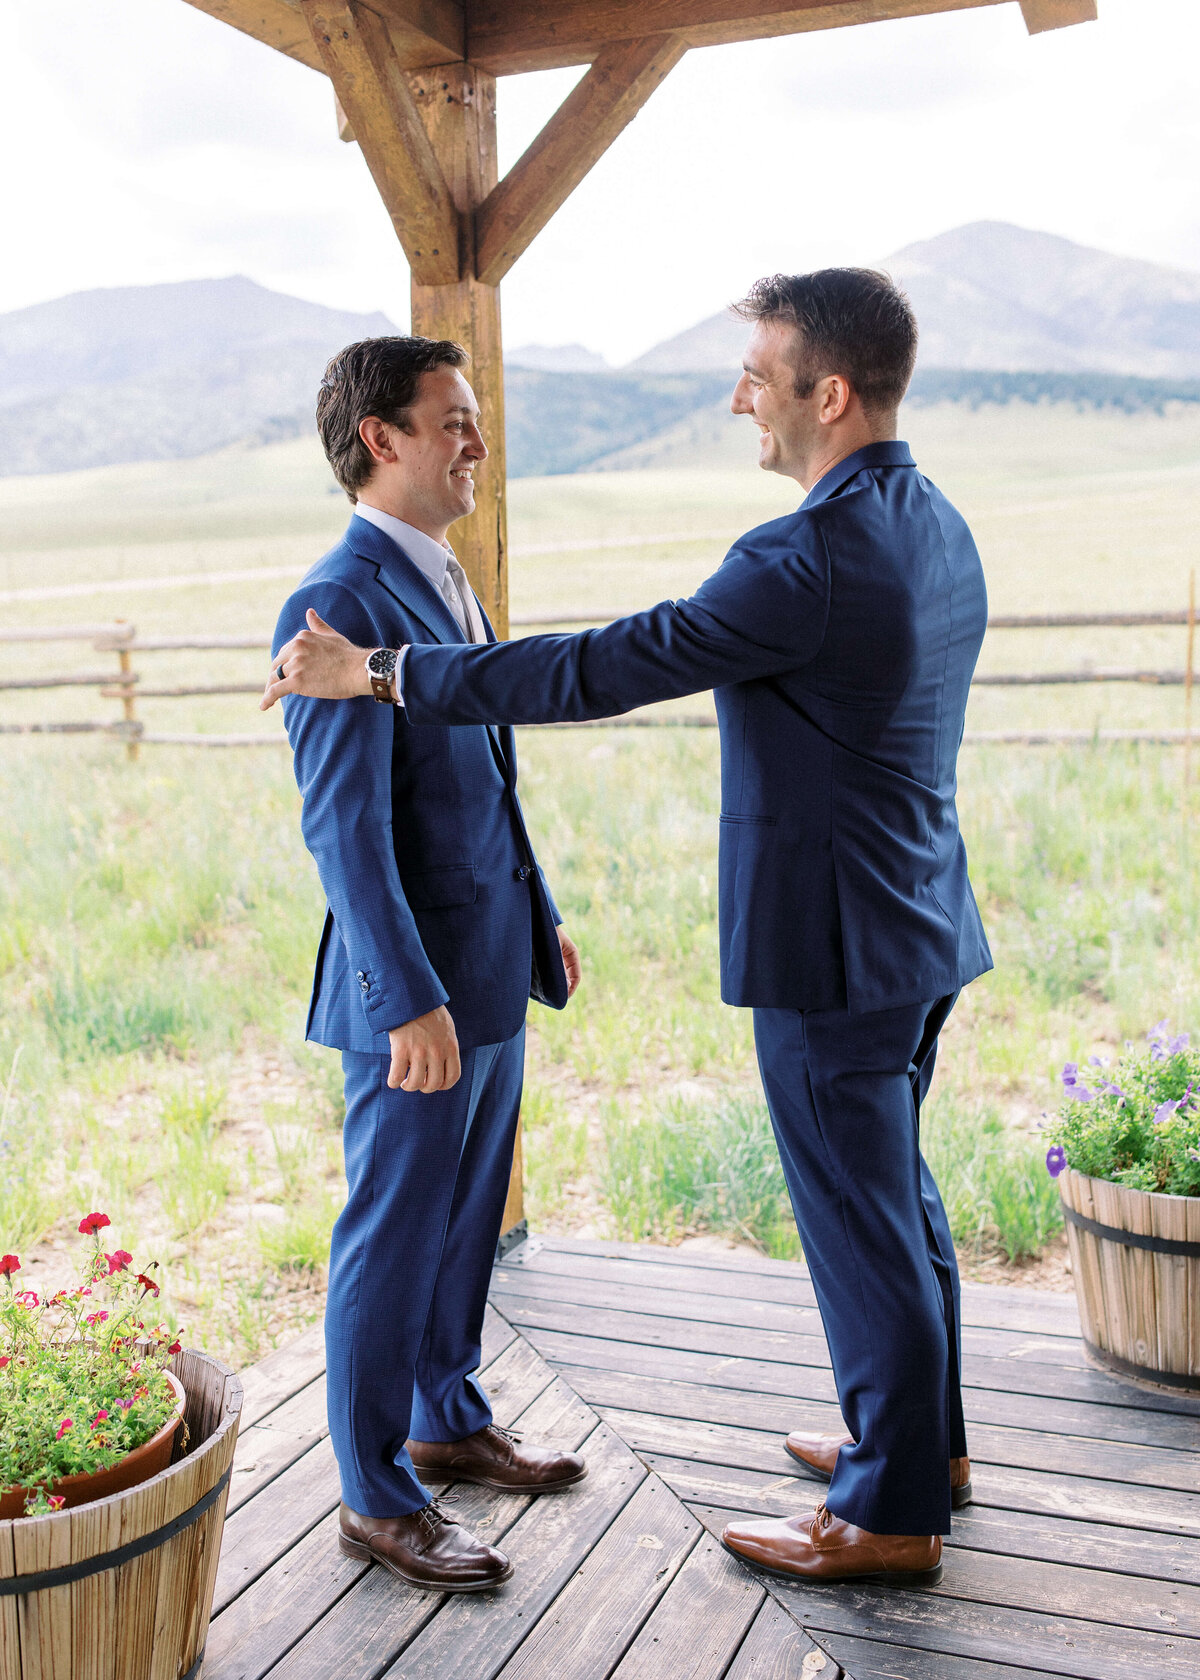 Best man in a navy suit congratulates his best friend, the groom, before the wedding